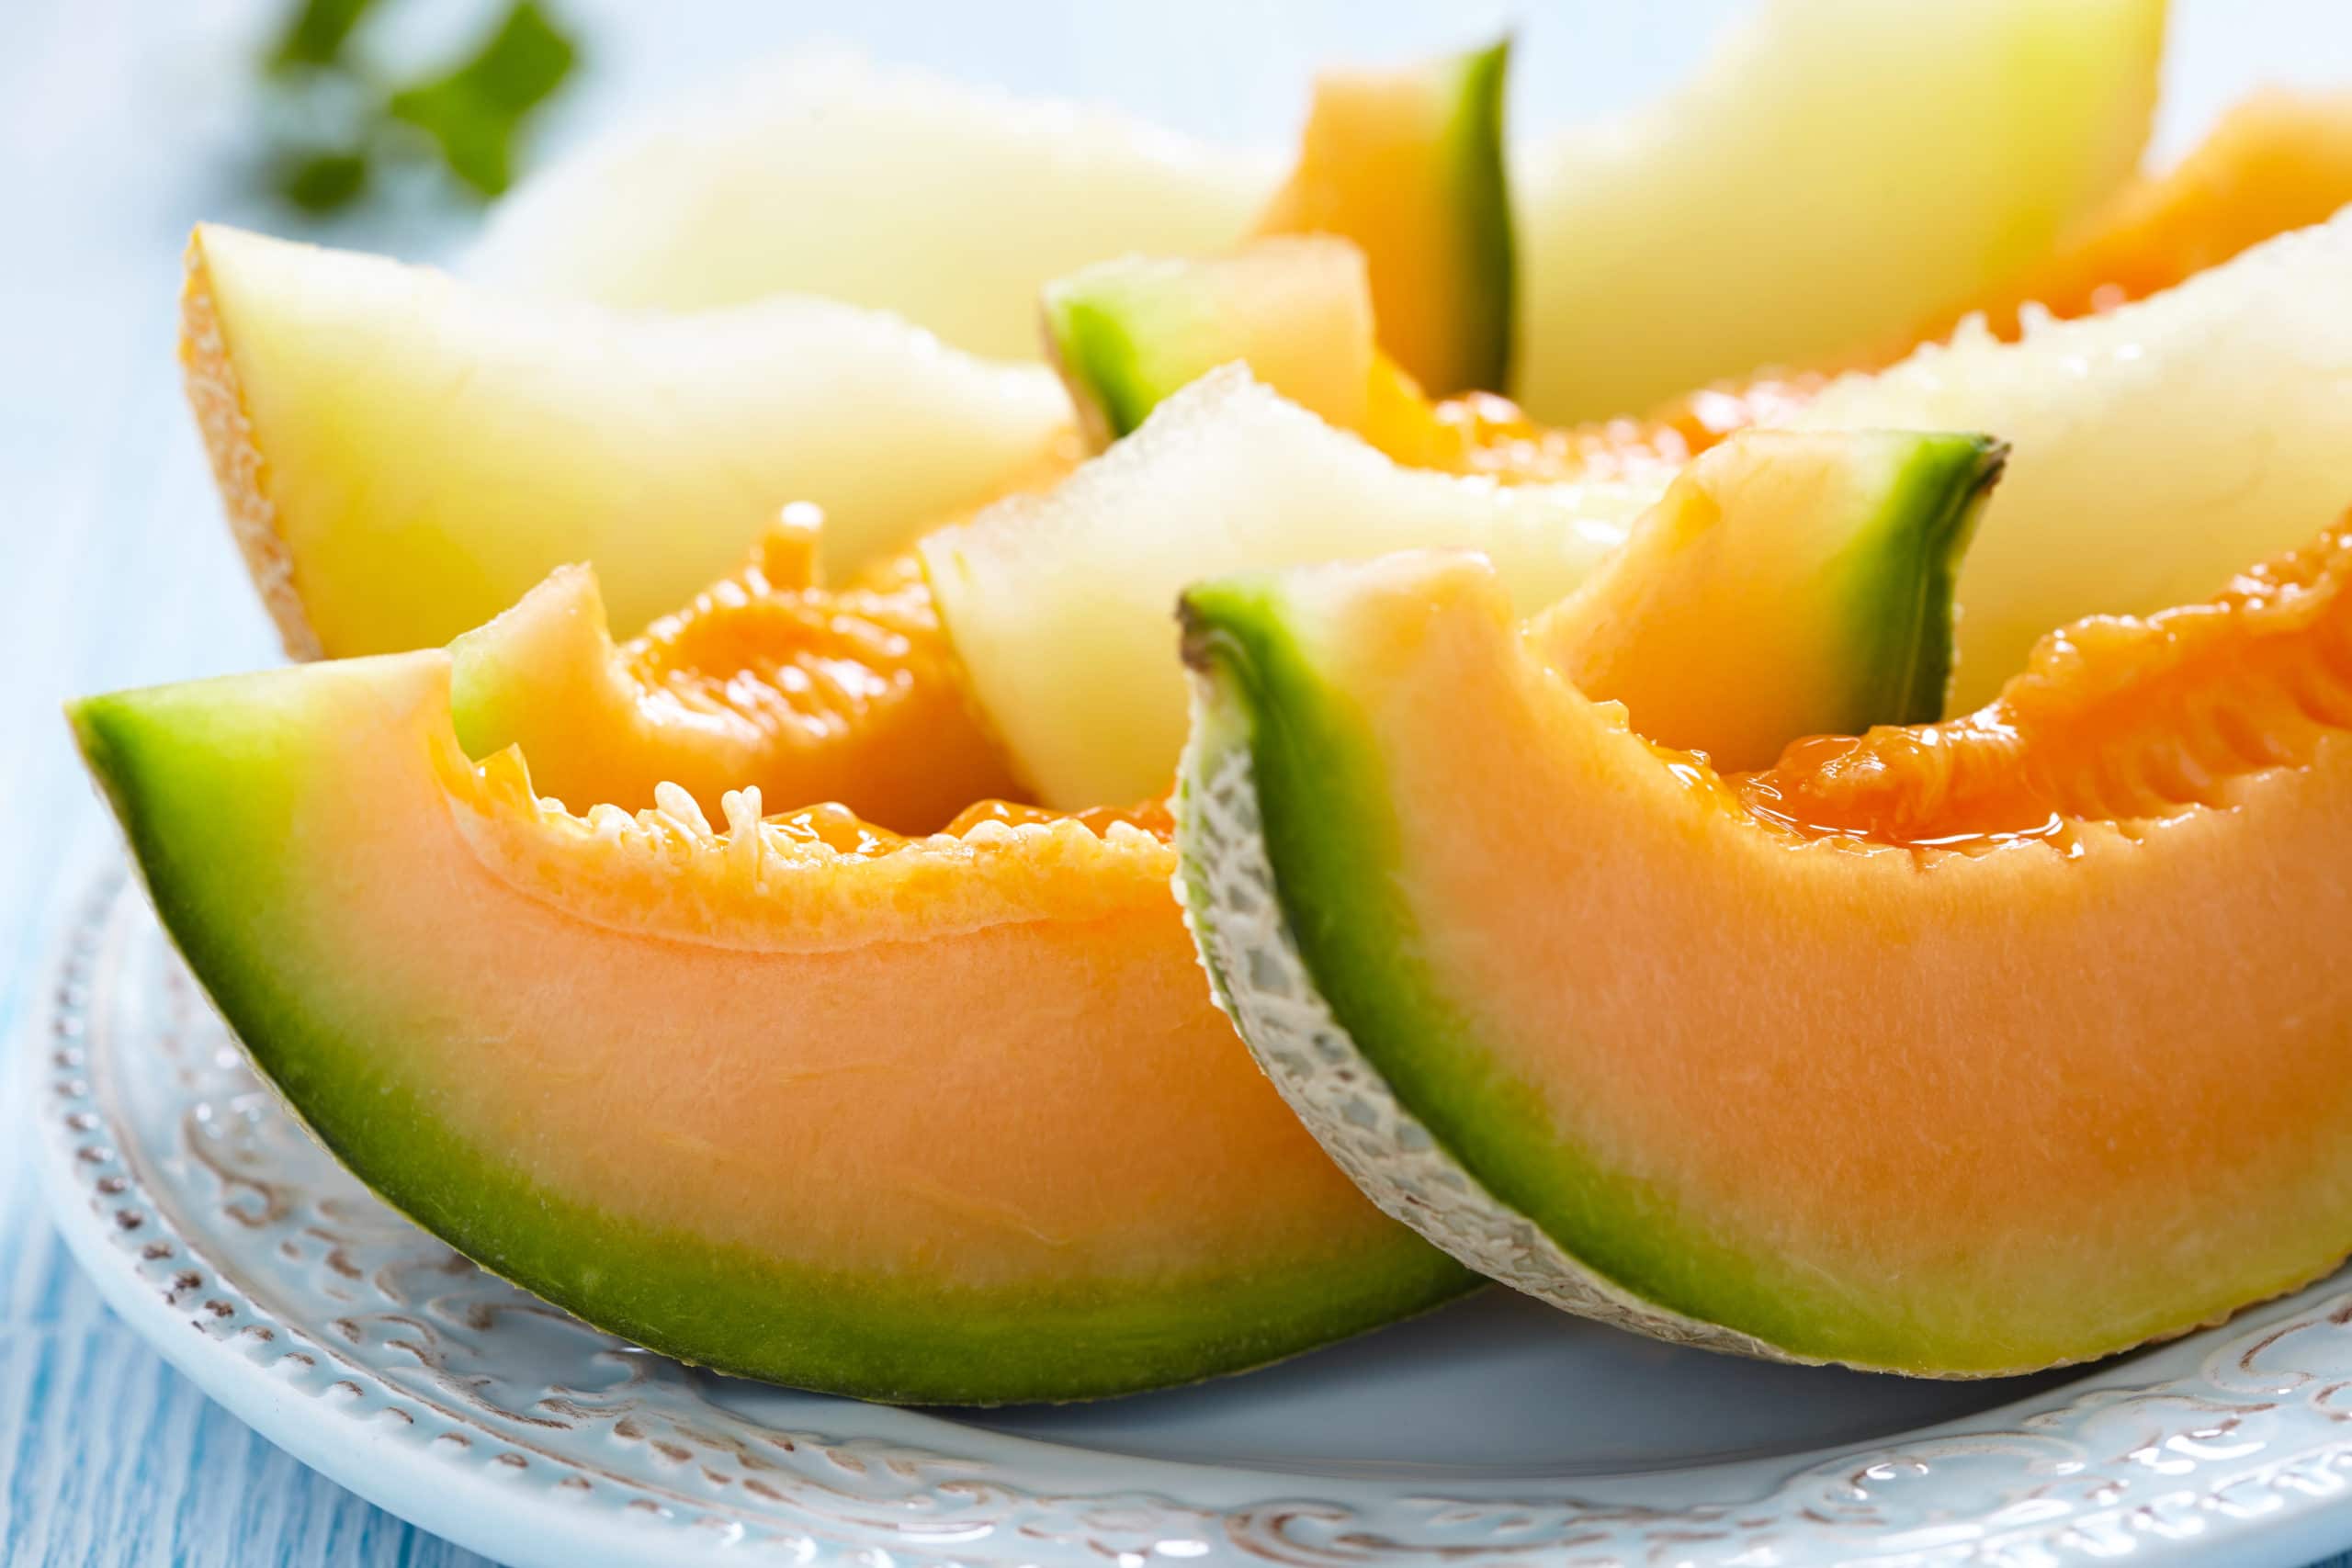 Melon slices on a plate 